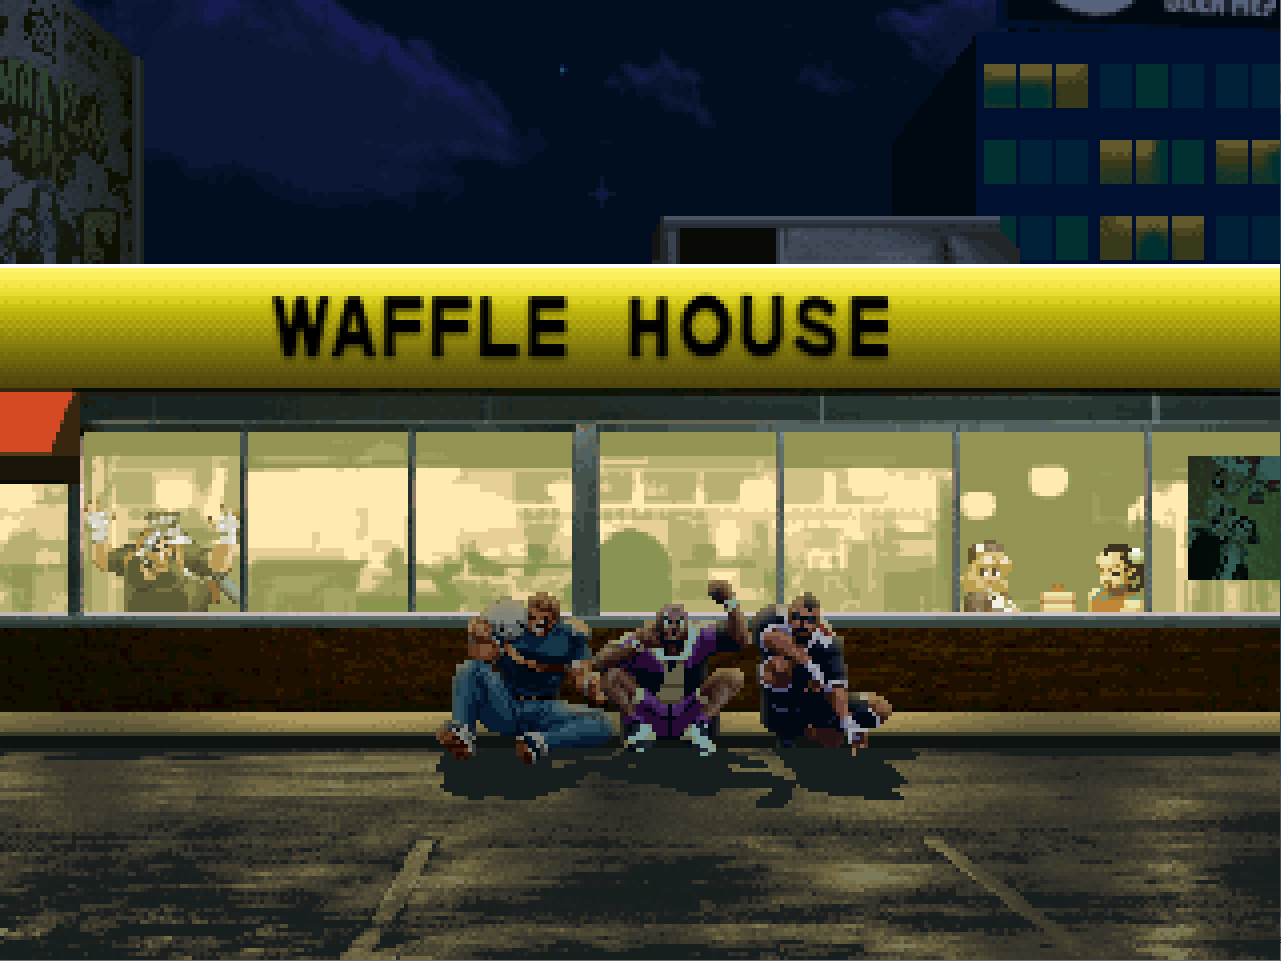 "Waffle House parking lot" by Valgallah